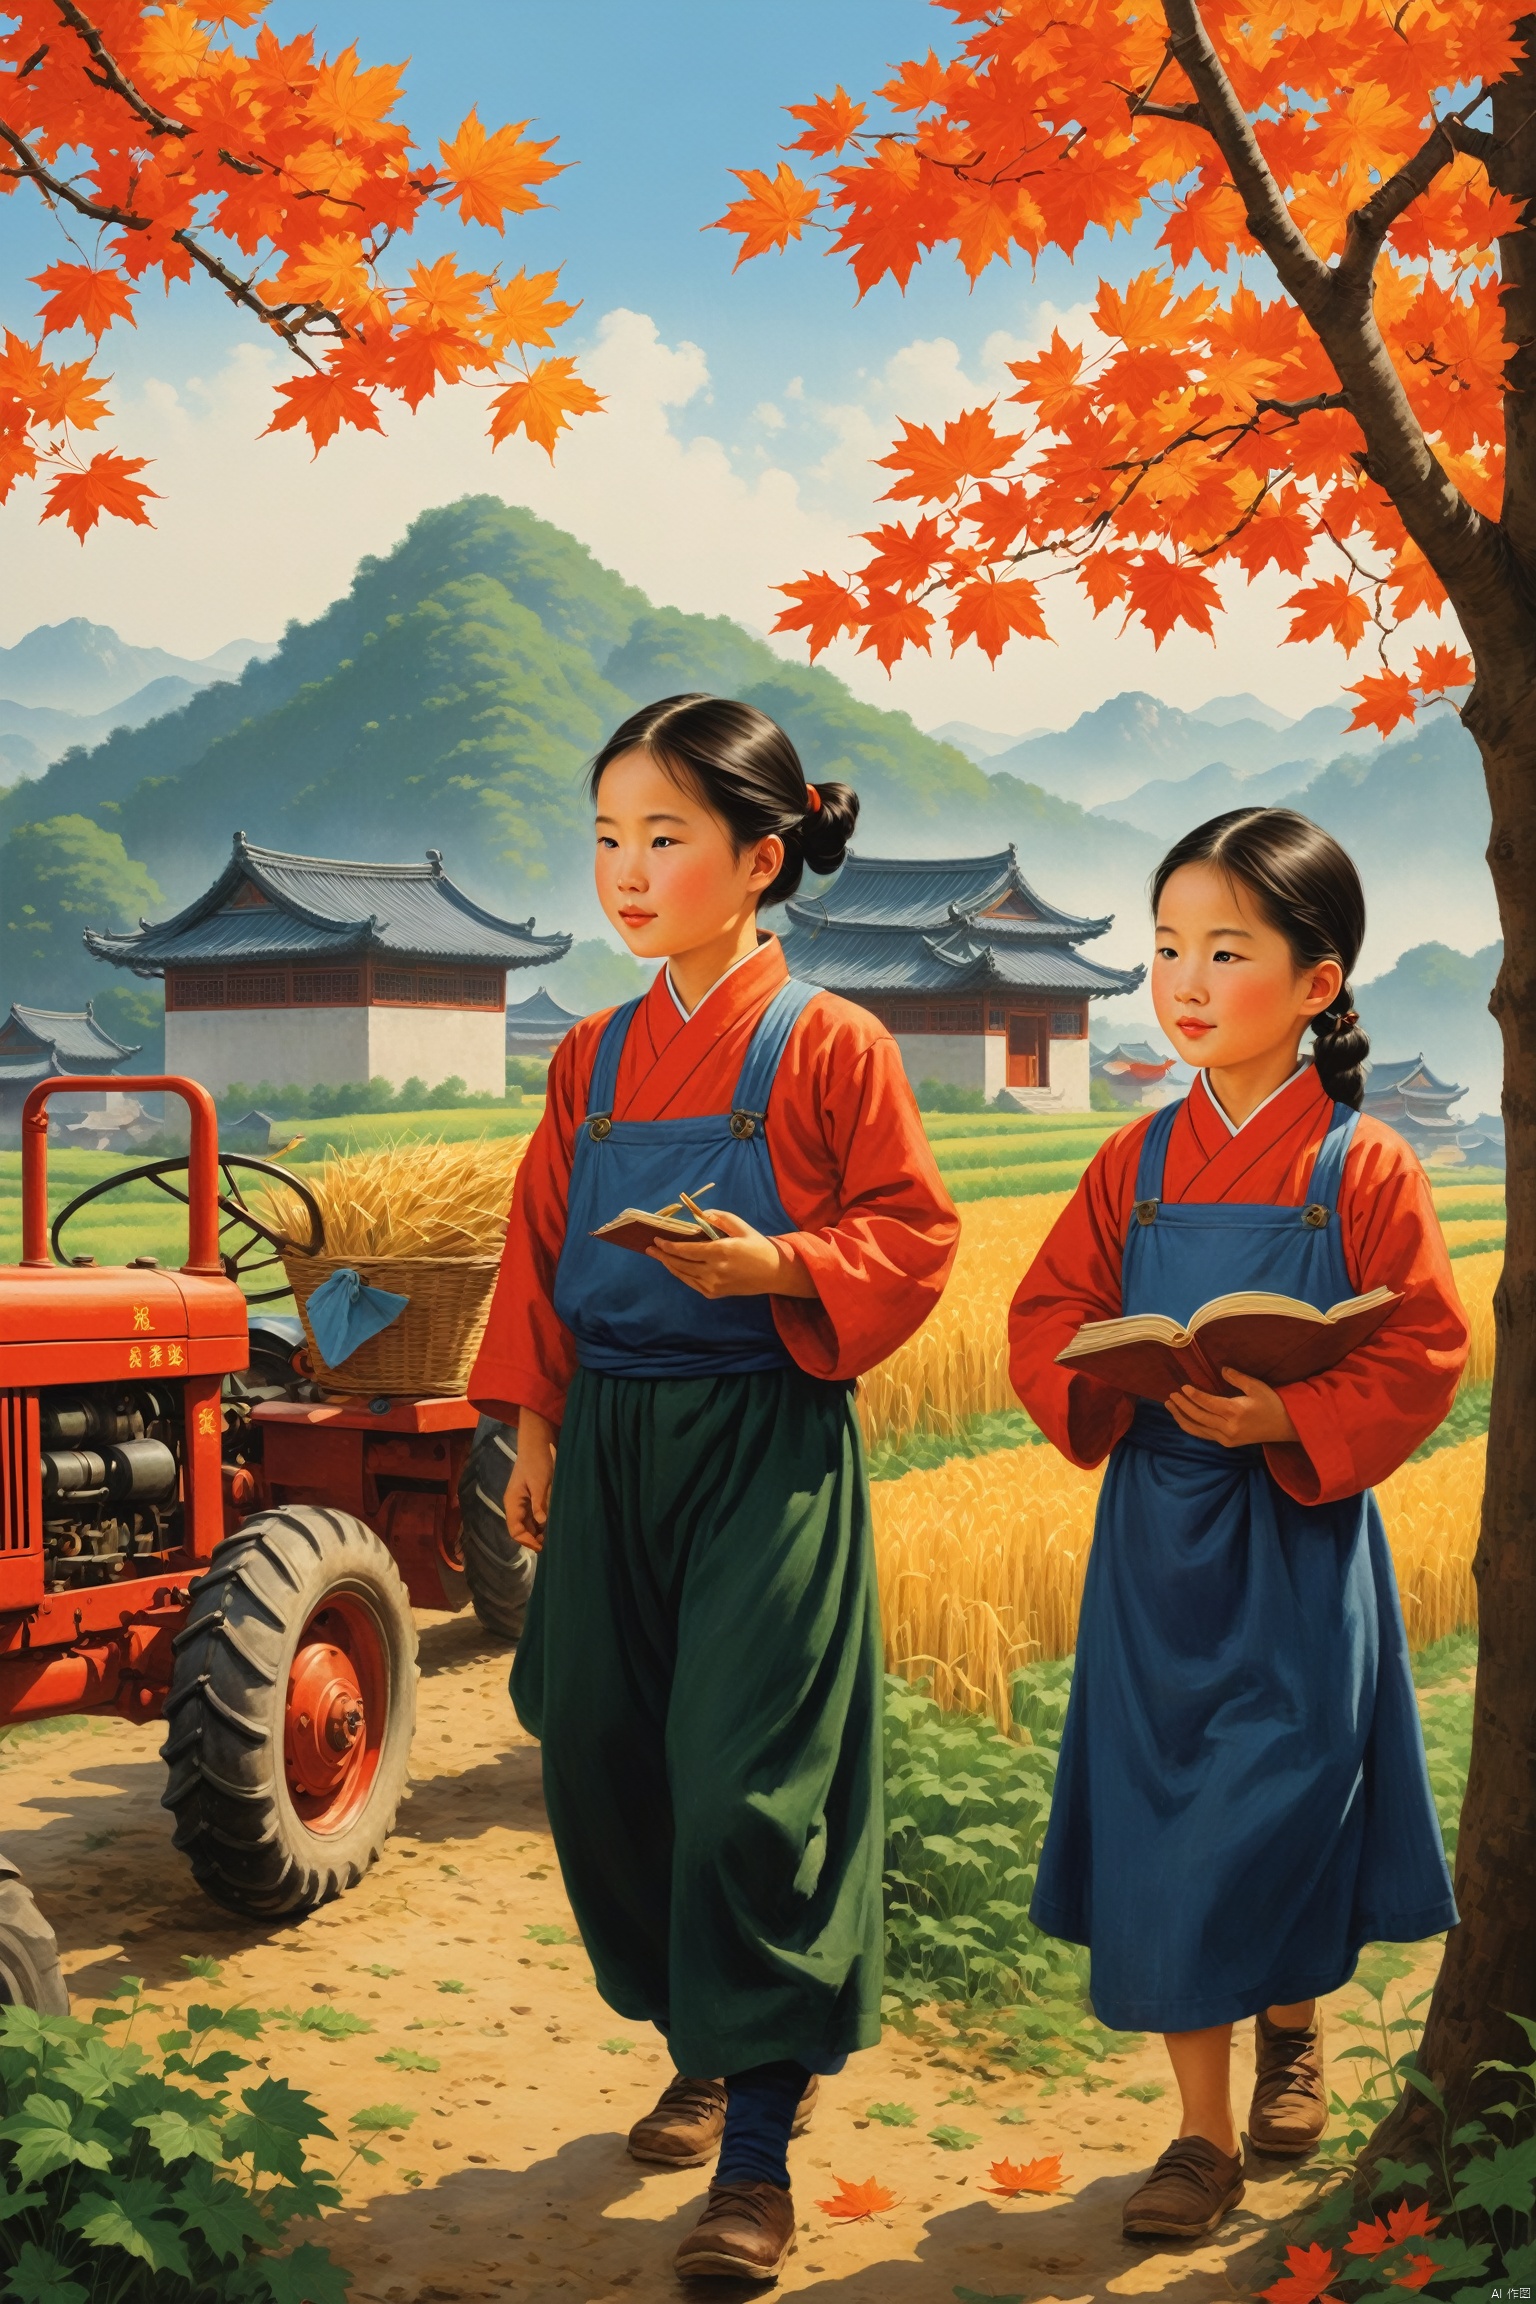  Thick painted national cartoons, farmer paintings, Feng Zikai, textbook illustrations, Eastern poetry and painting, children's illustrations, 1980s illustrations, China, rural areas, during the Republic of China era, in the fields where maple leaves fall, boys and girls, a group of children, playing in the fields, masterpieces, the best quality, novel illustration style, depicting rural life, warm scenes, children's book illustrations, official art, digital painting, fine character portrayal, Clear facial features, complete fingers, perfect composition,